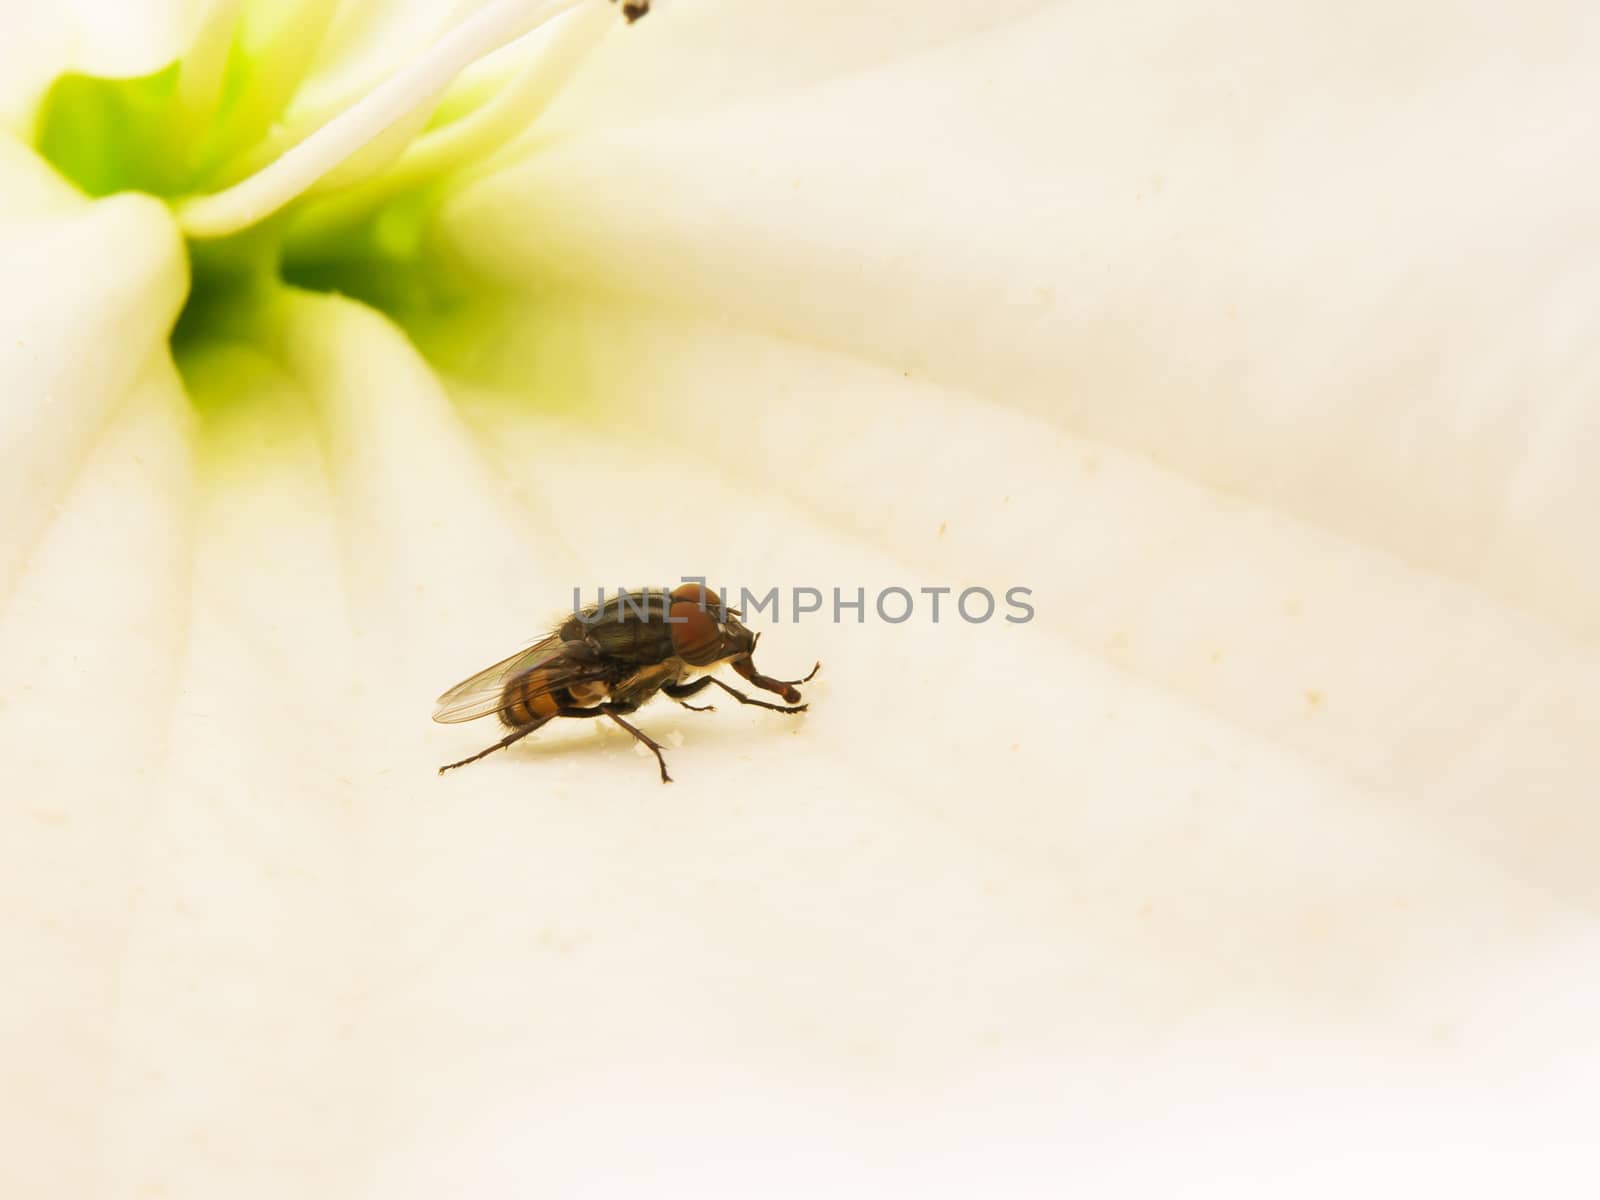 hoverfly (Syrphidae) on trumpet flower pollen eating.